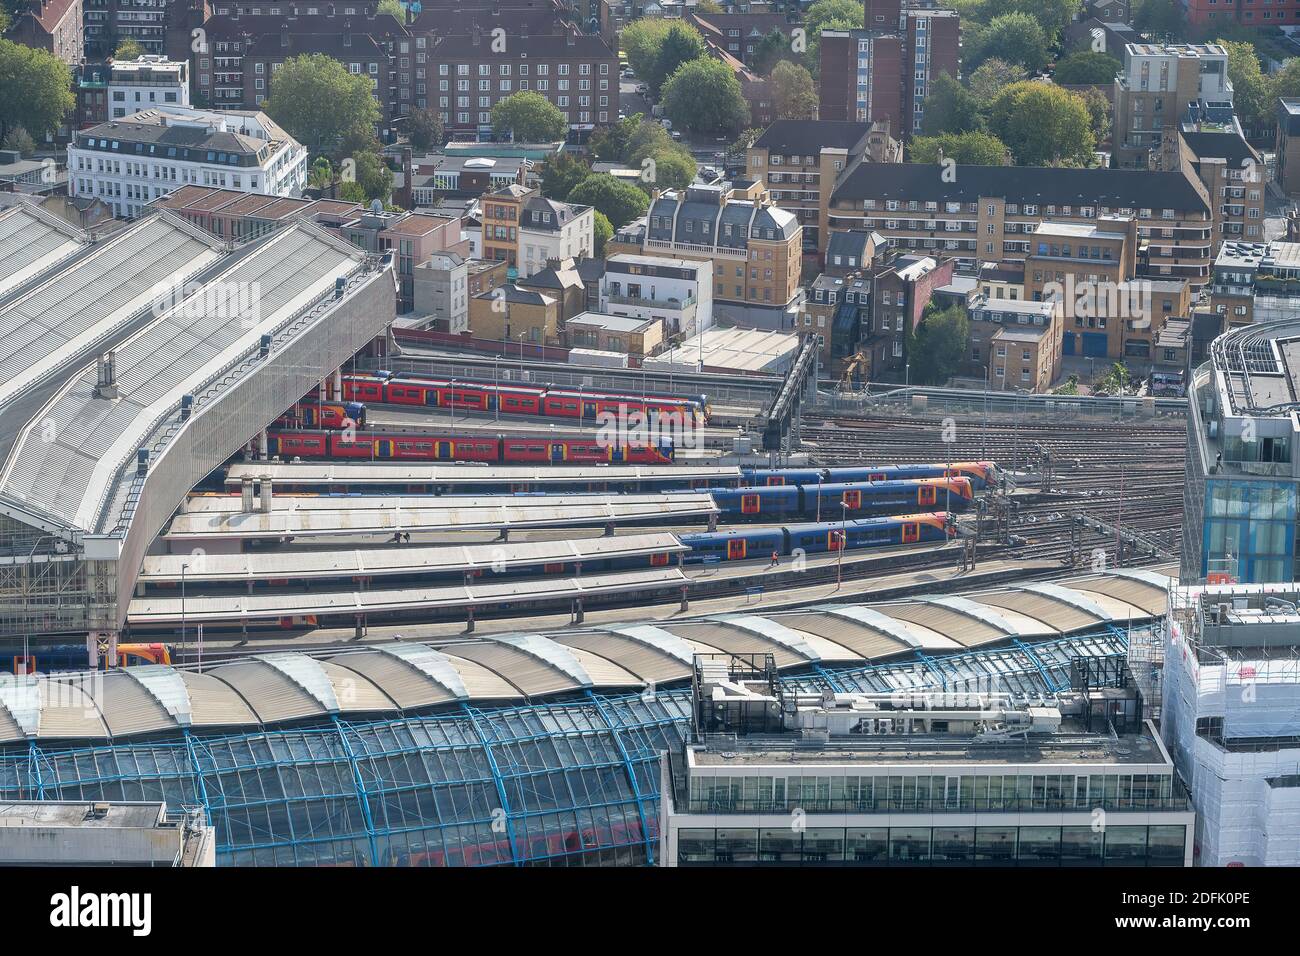 LONDON, UNITED KINGDOM - SEPTEMBER 28th 2020: Aerial view of Waterloo station in London which is served by South Western Railway Stock Photo